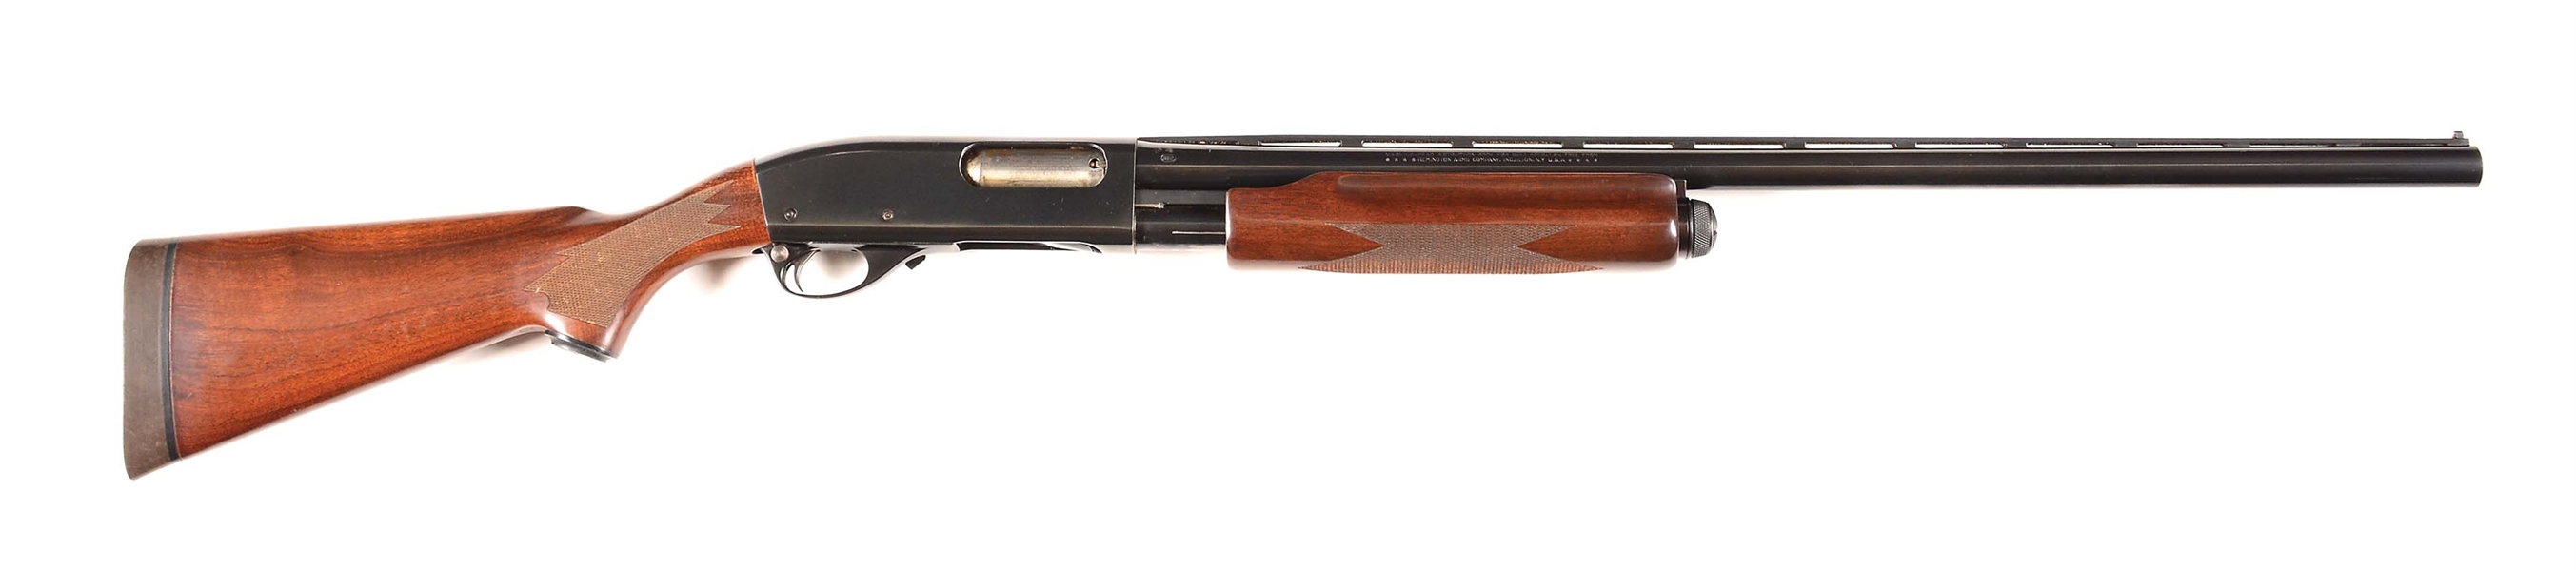 (M) REMINGTON MODEL 870 WITH WILLIAM K. DUPONT PROVENANCE AND DUCKS UNLIMITED SENIOR VICE PRESIDENT PATCH.